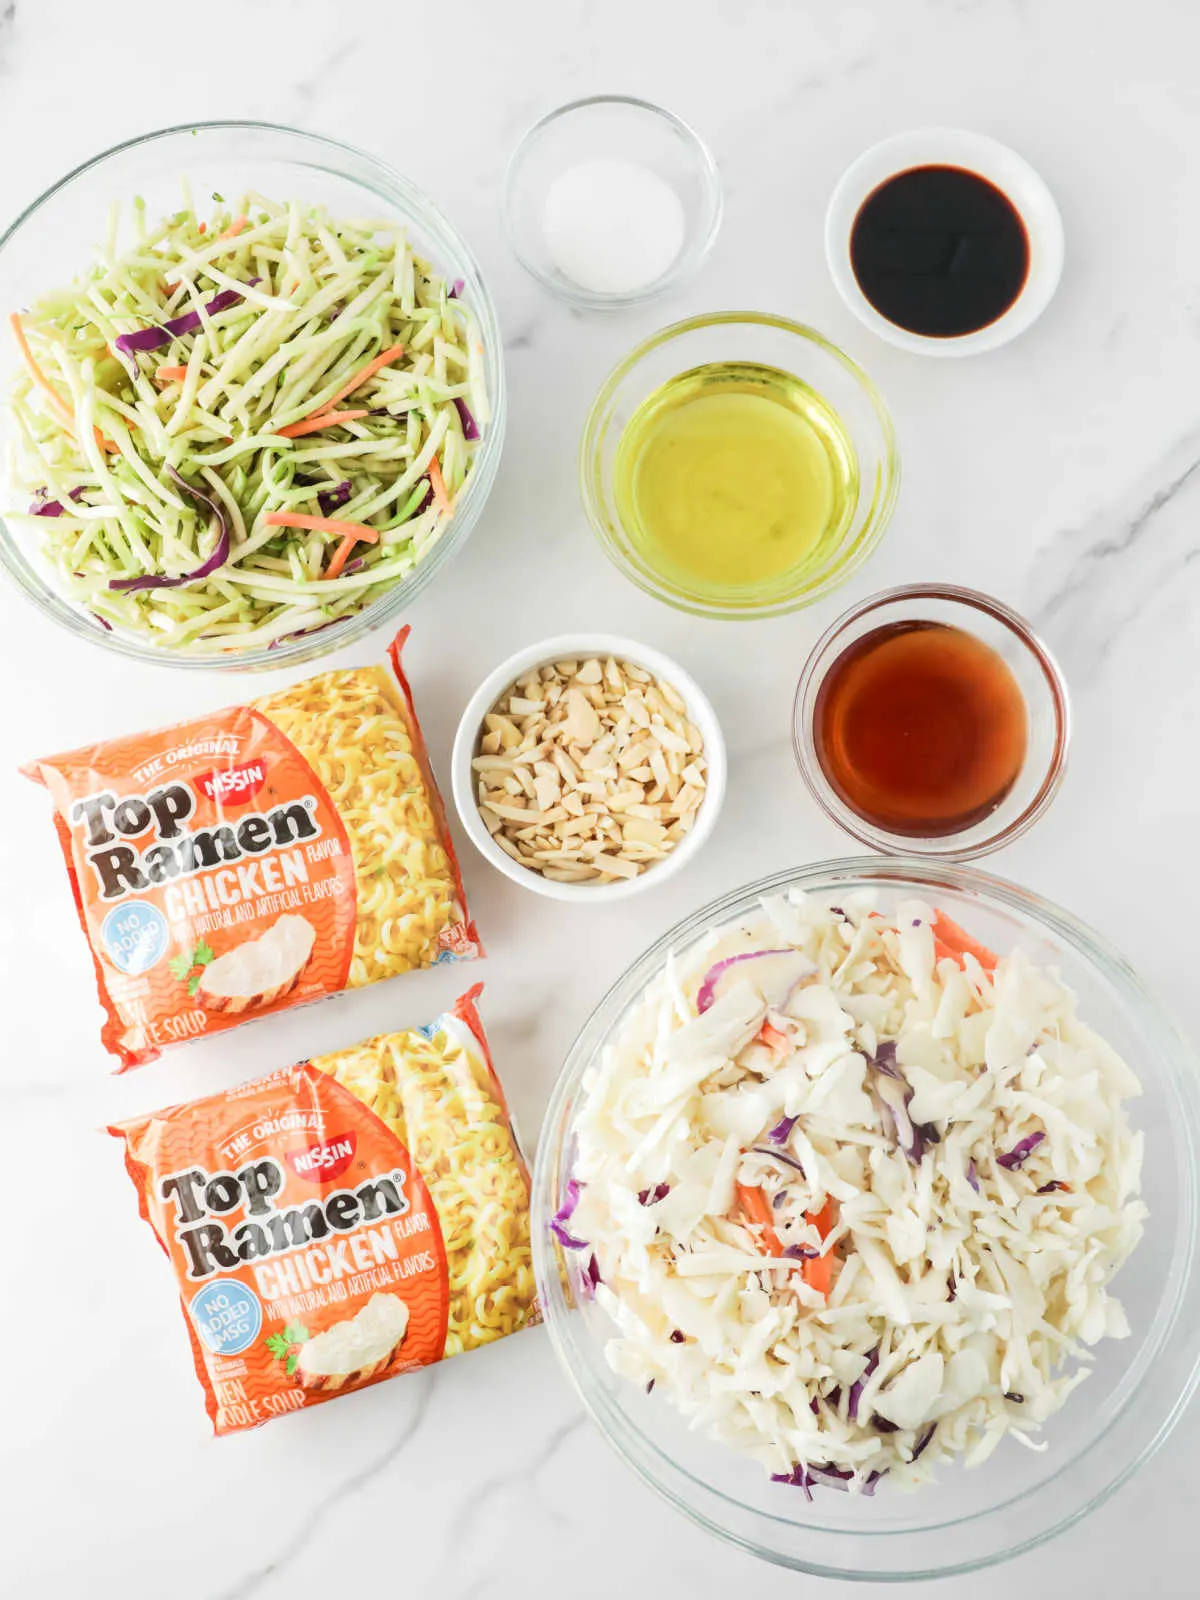 Ingredients including broccoli slaw mix, coleslaw mix, ramen noodles, slivered almonds, soy sauce, olive oil, sugar, and rice vinegar ready to be made into ramen slaw.